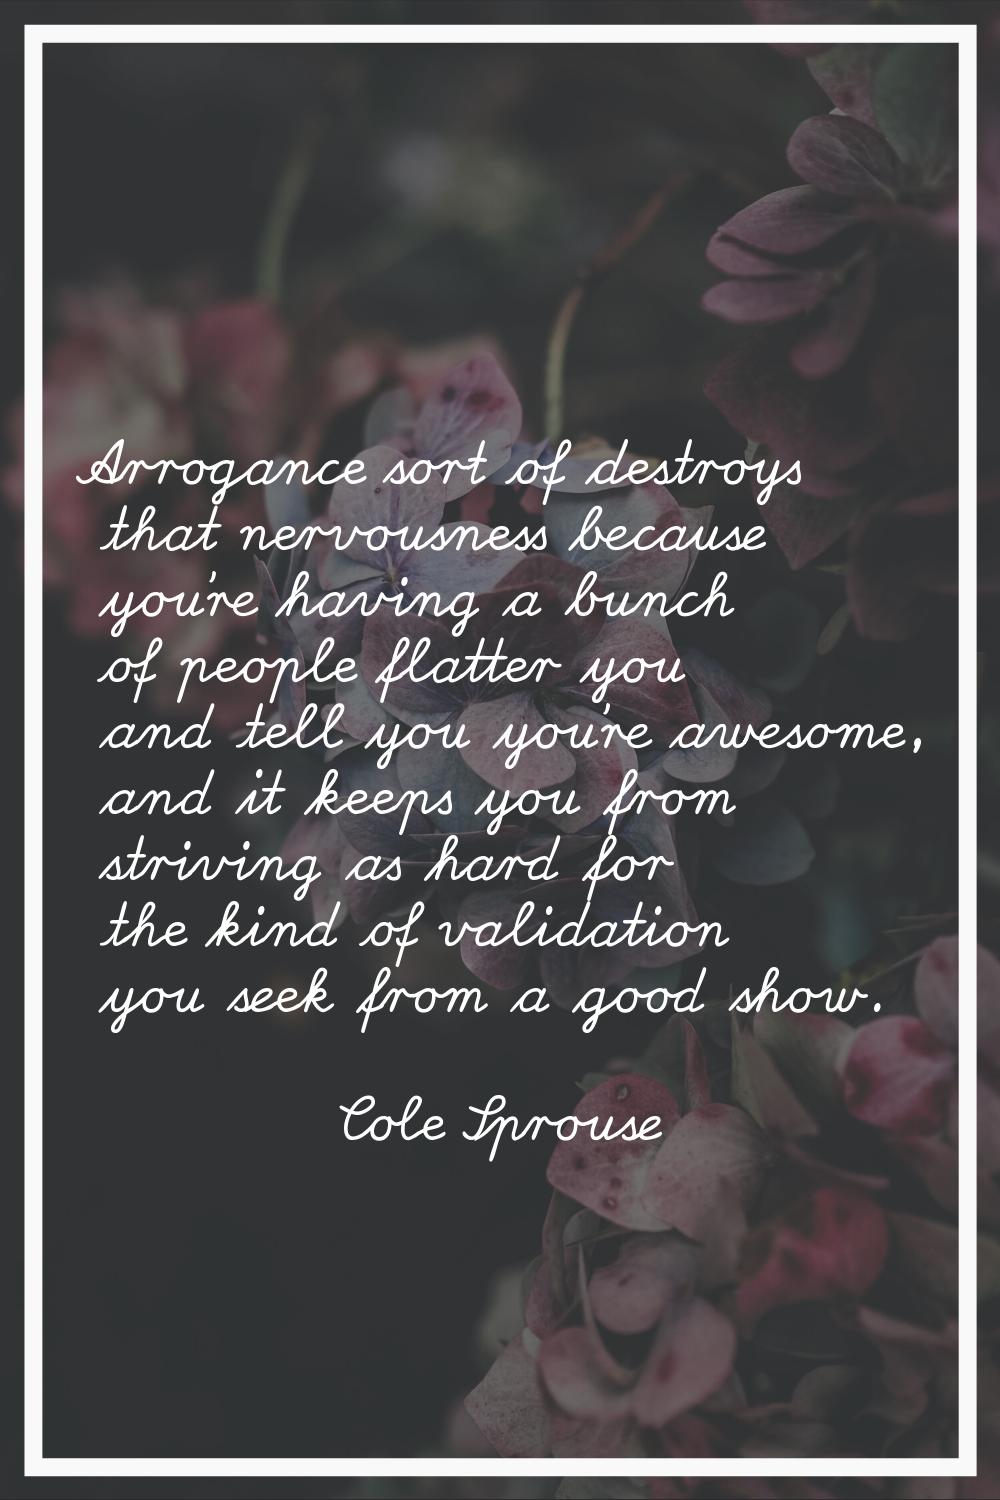 Arrogance sort of destroys that nervousness because you're having a bunch of people flatter you and